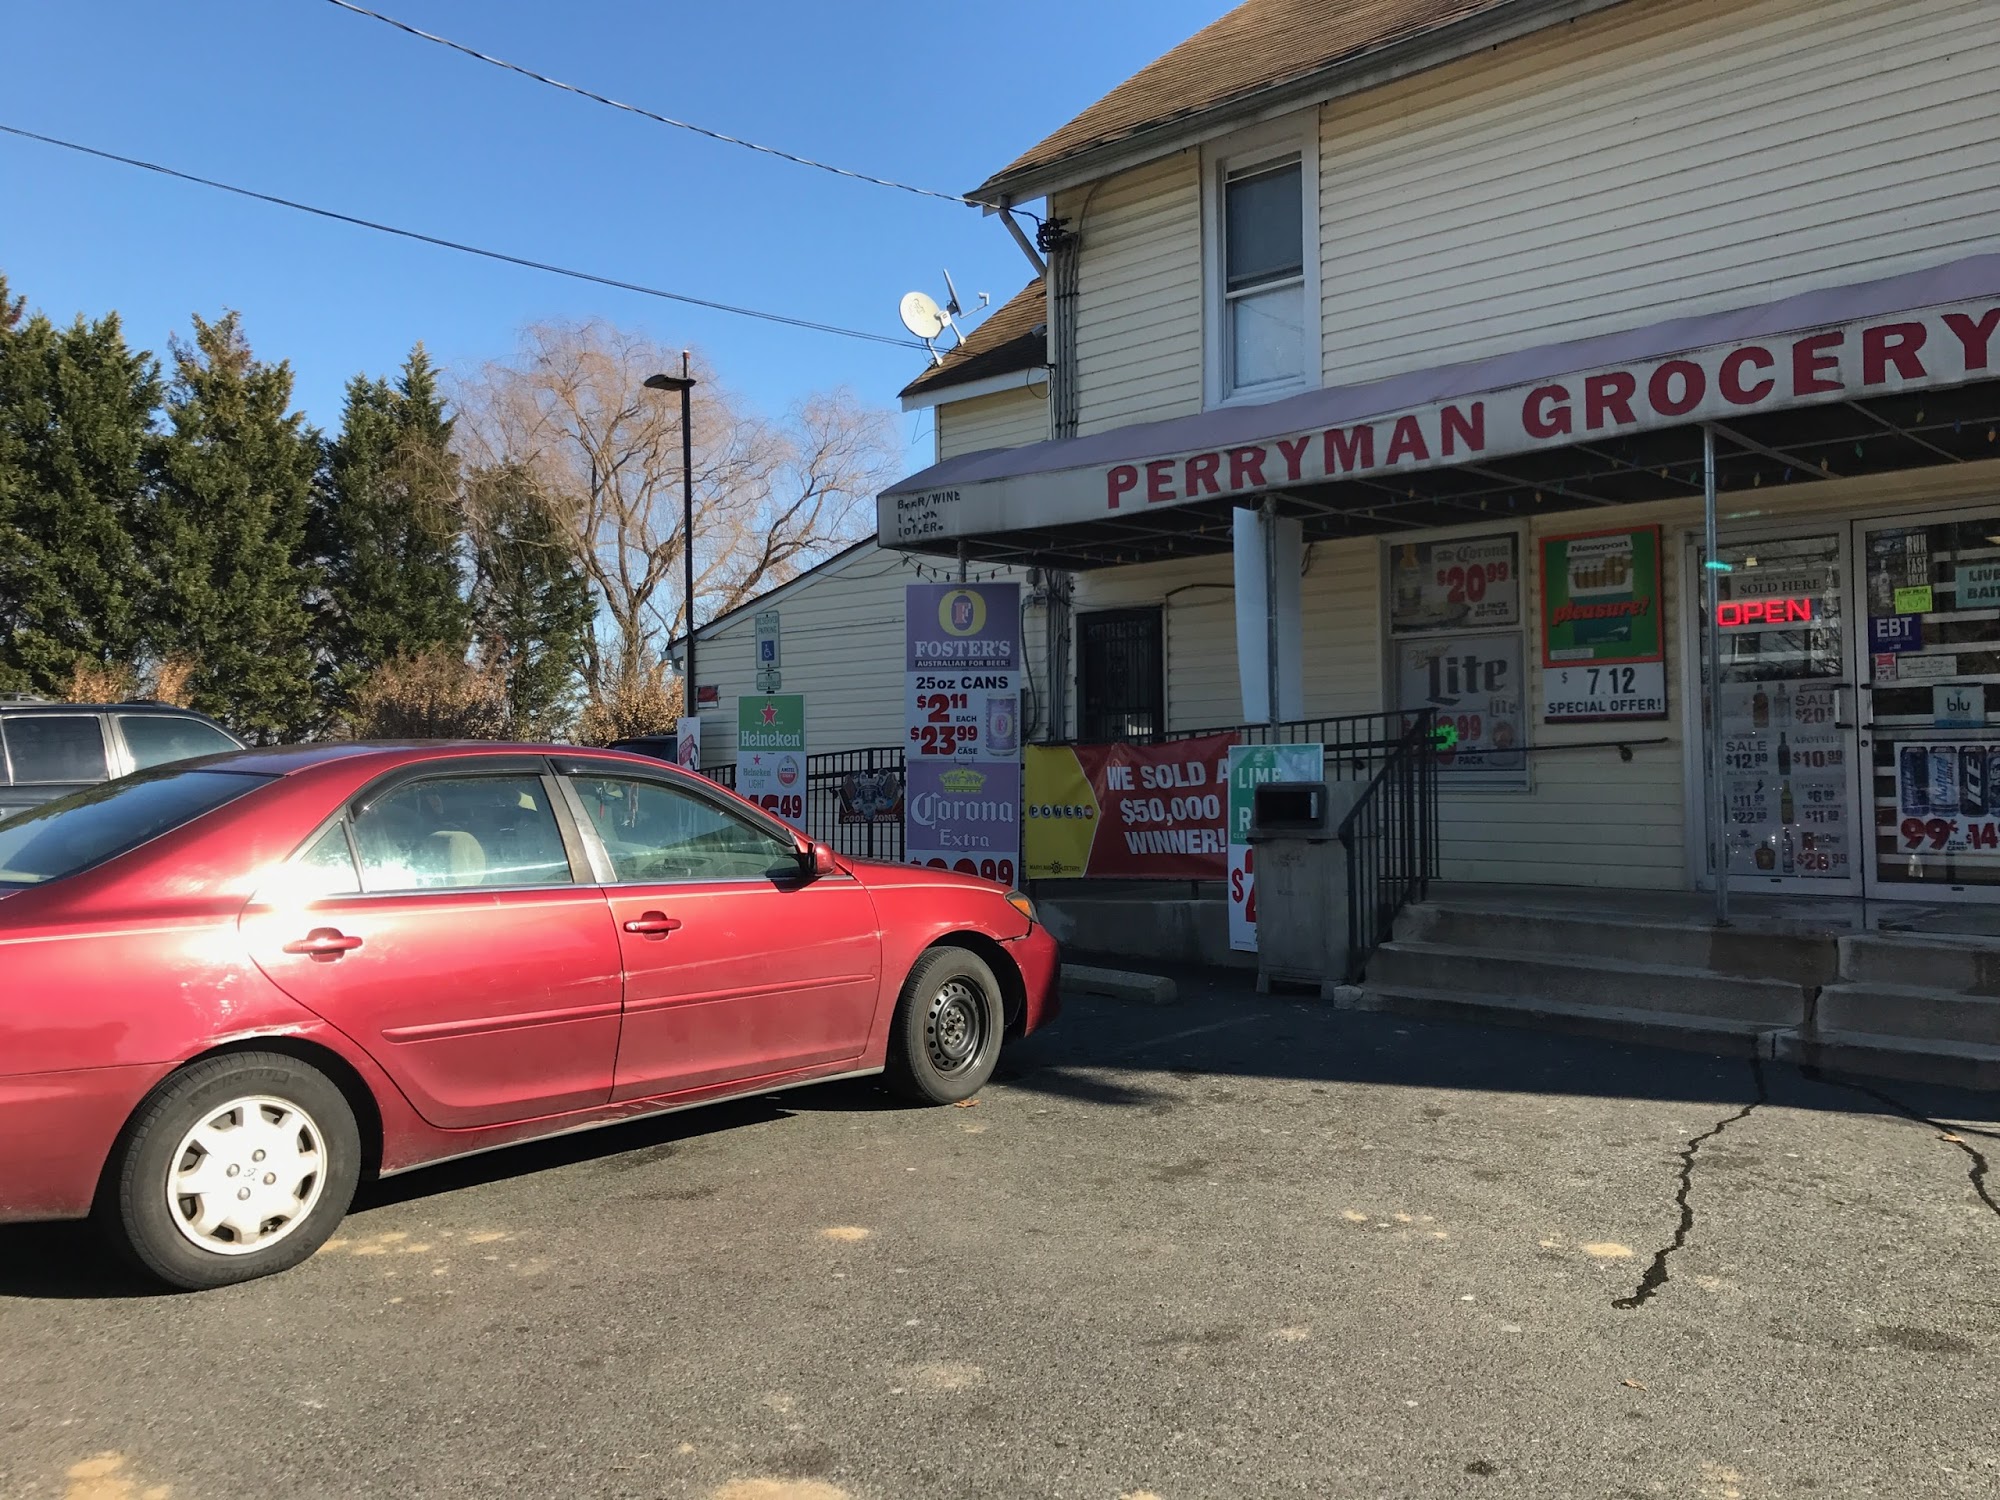 Perryman grocery ,deli , liqour and beer